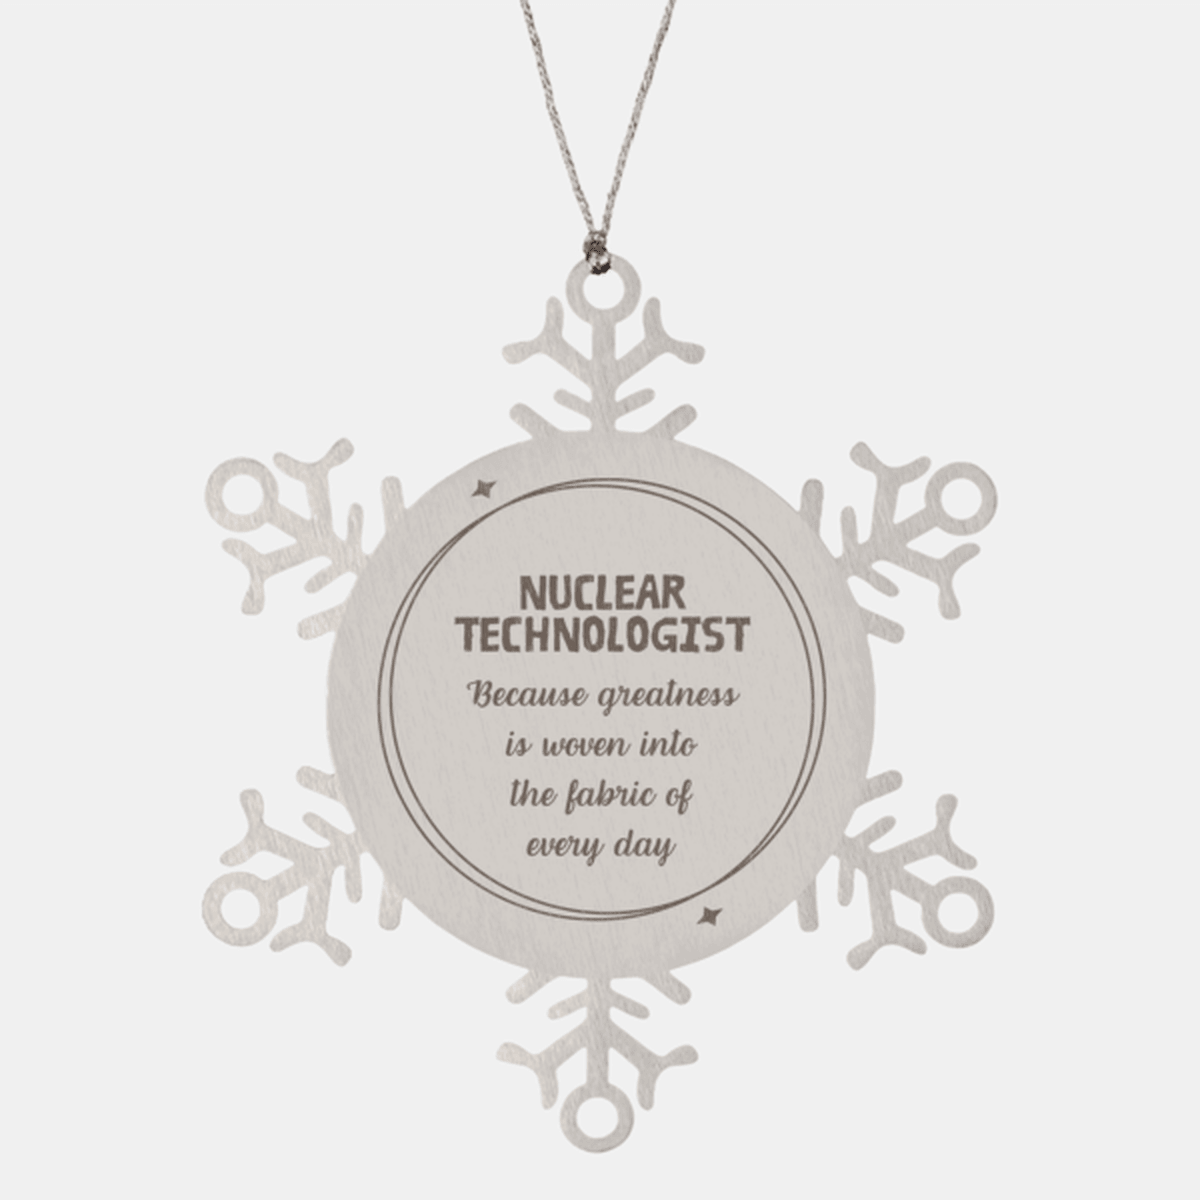 Sarcastic Nuclear Technologist Snowflake Ornament Gifts, Christmas Holiday Gifts for Nuclear Technologist Ornament, Nuclear Technologist: Because greatness is woven into the fabric of every day, Coworkers, Friends - Mallard Moon Gift Shop